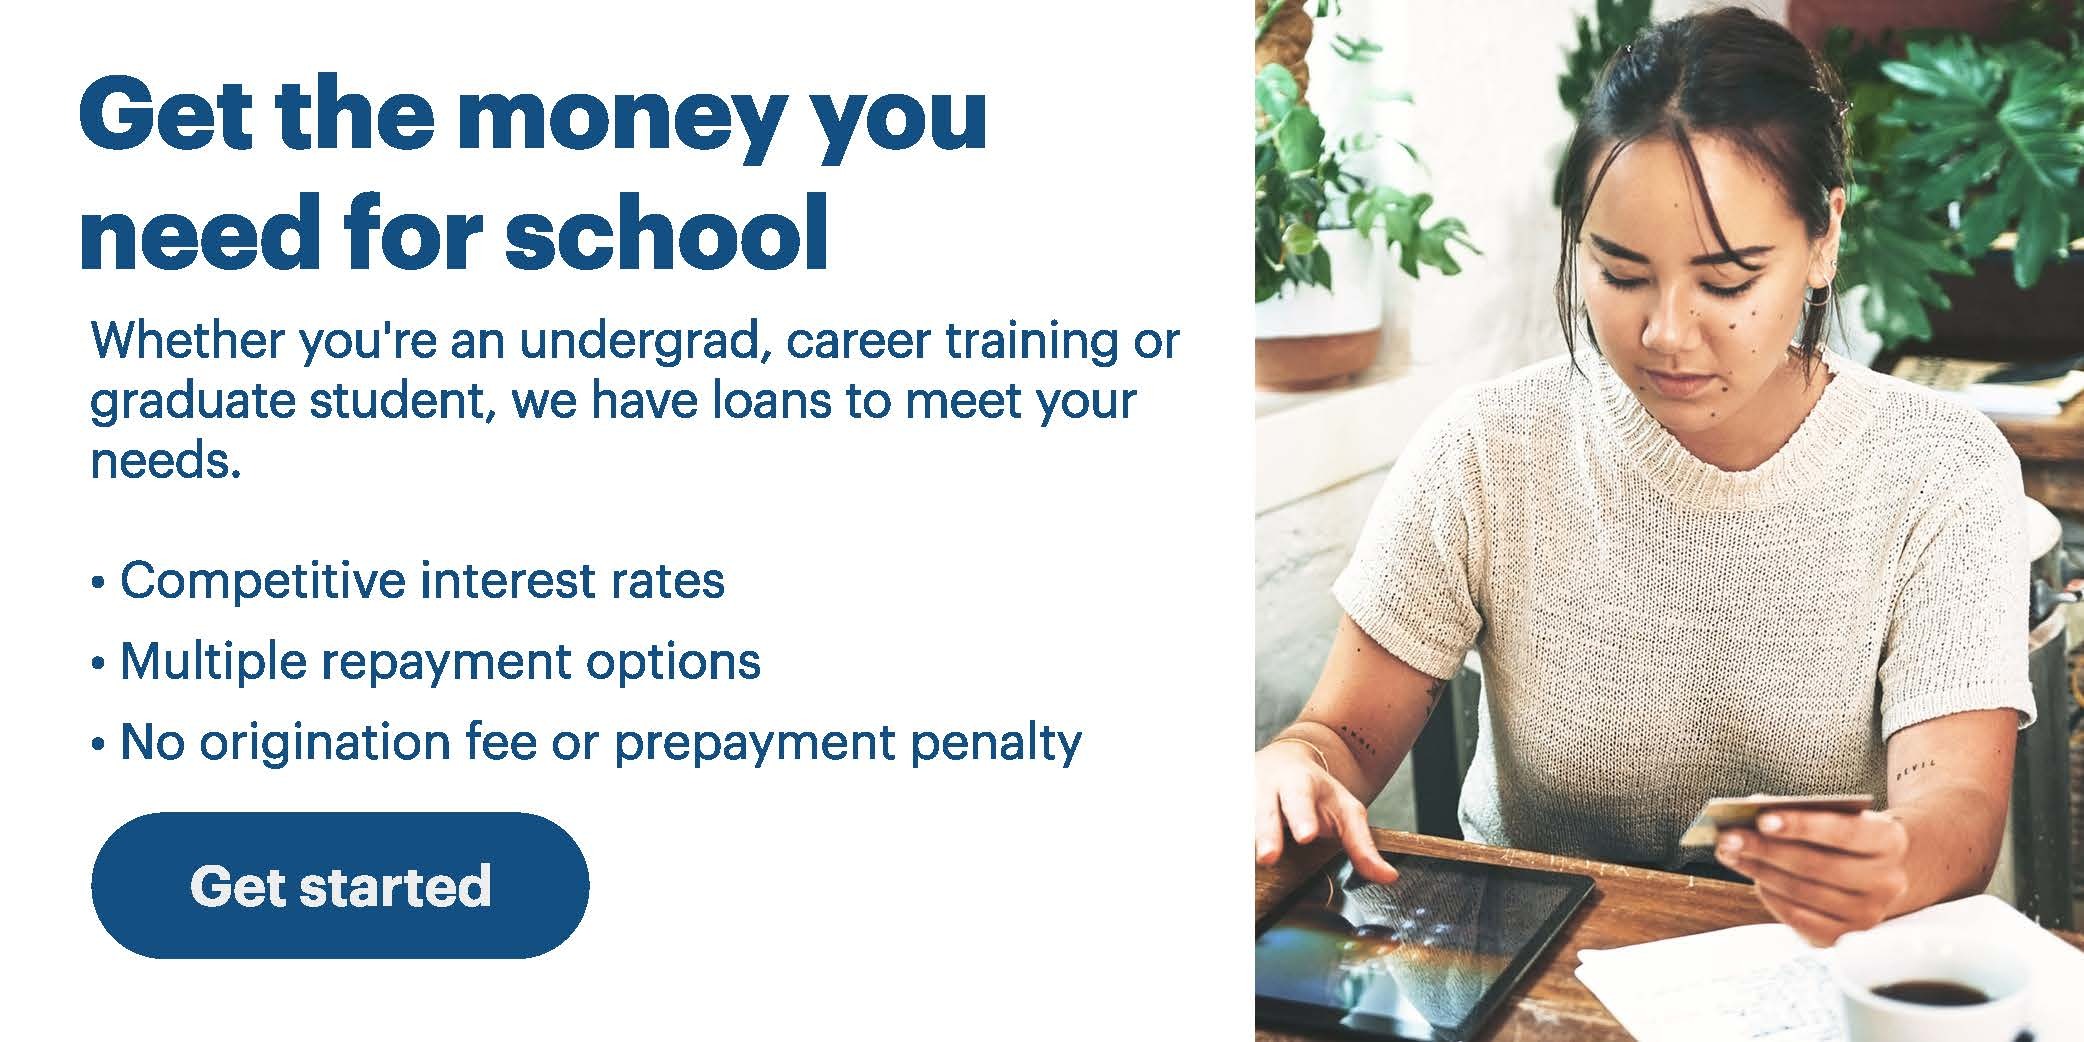 Shimer Private Student Loans by SallieMae for Shimer College Students in Chicago, IL